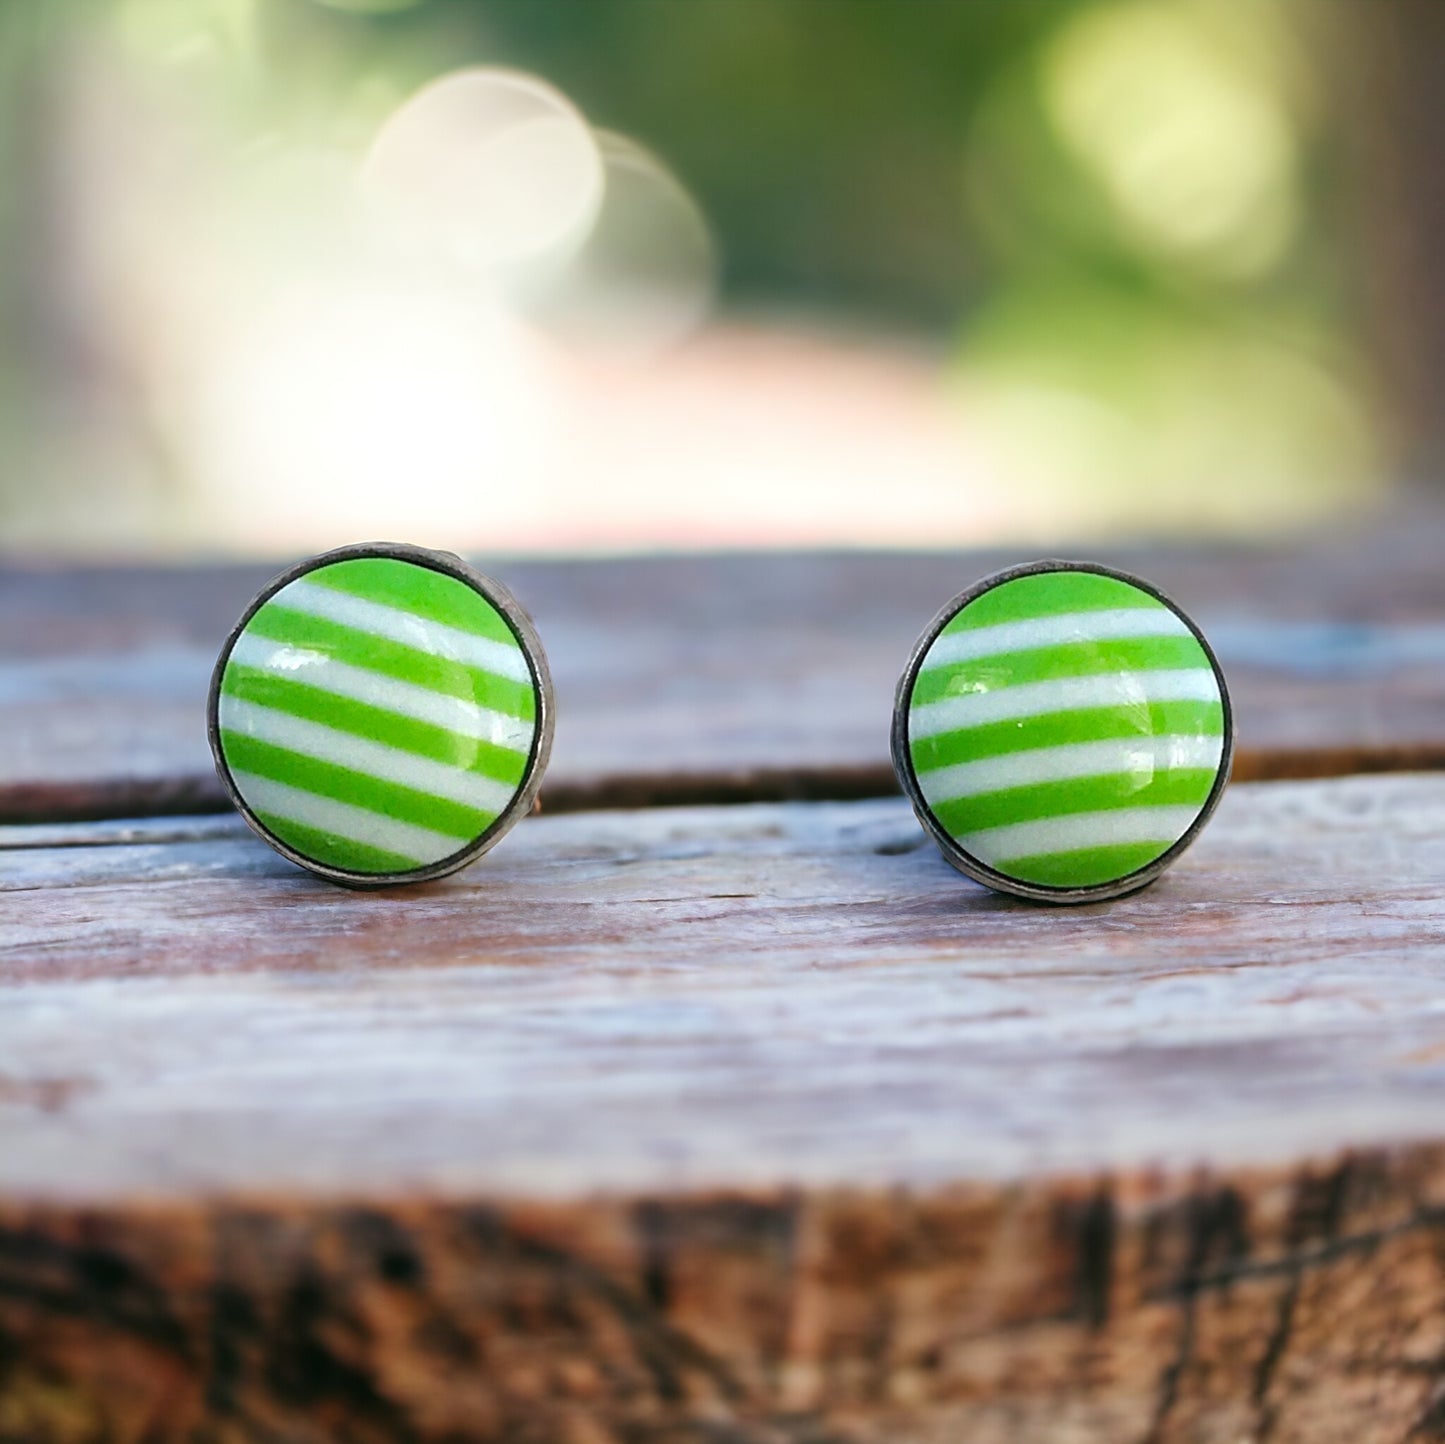 Green & White Striped Silver Stud Earrings - Chic & Stylish Accessories